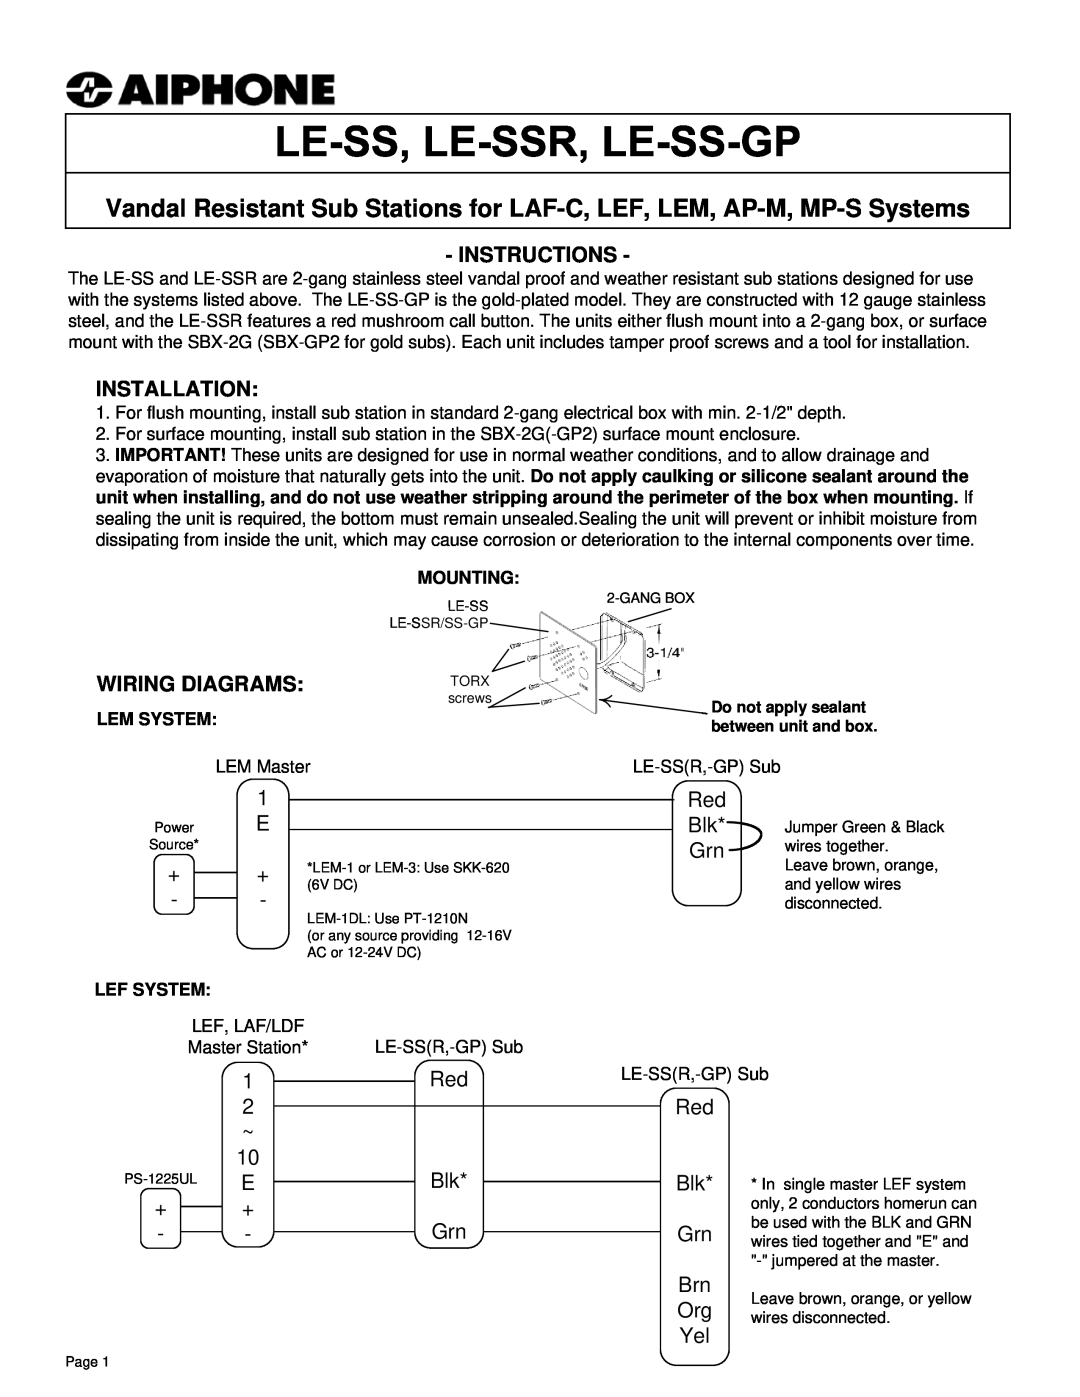 Aiphone LE-SS/LE-SSR/LE-SS-GP manual Instructions, Installation, Wiring Diagrams 